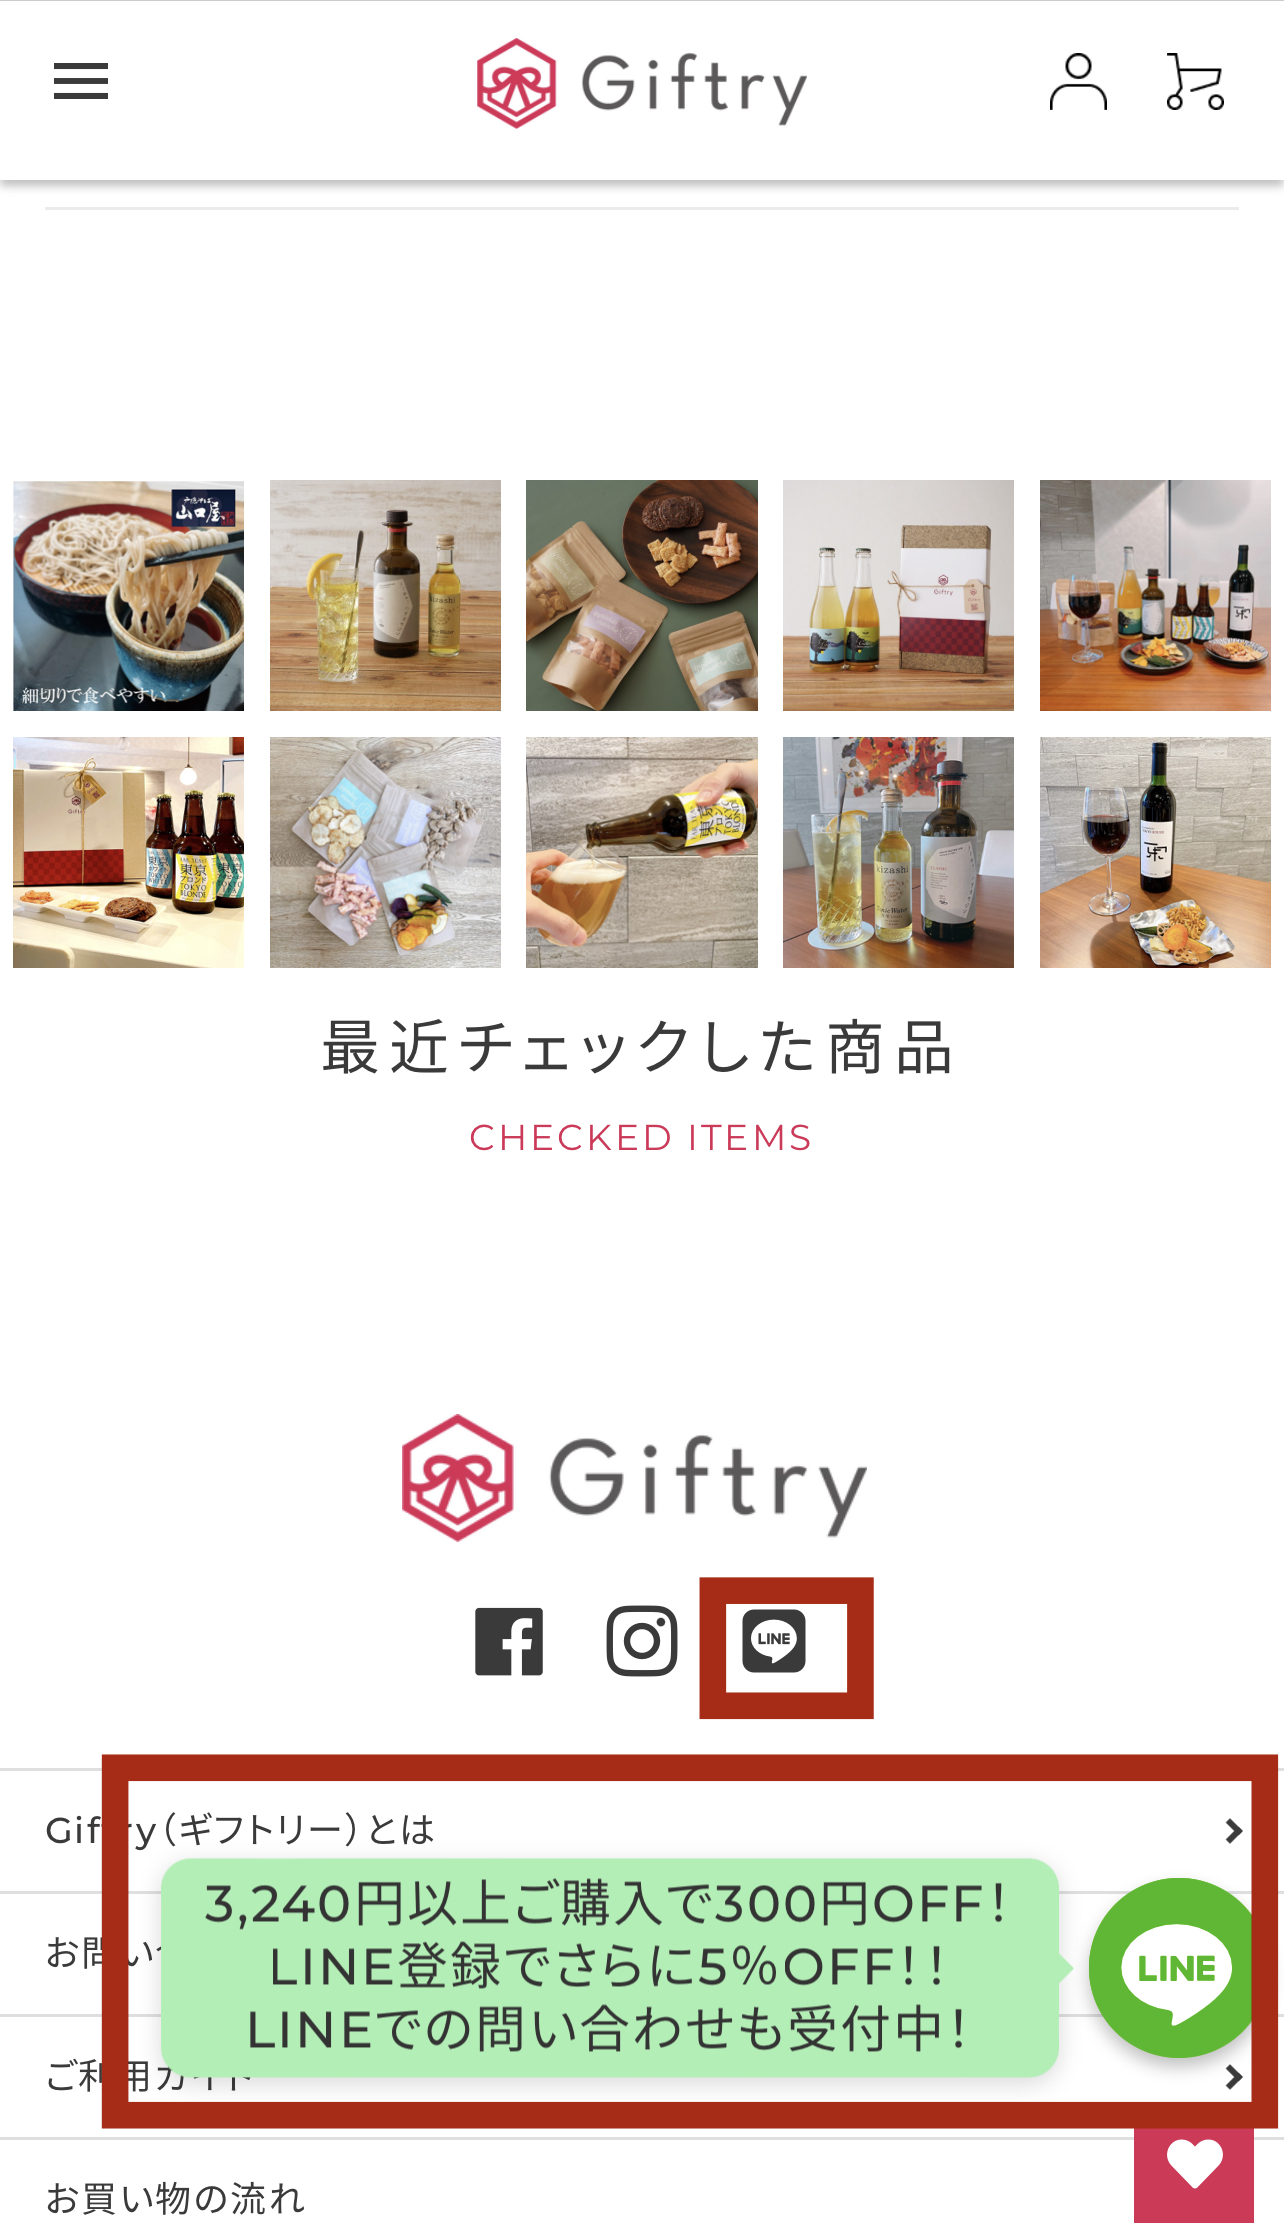 Giftry(ギフトリー)のLINE@登録方法